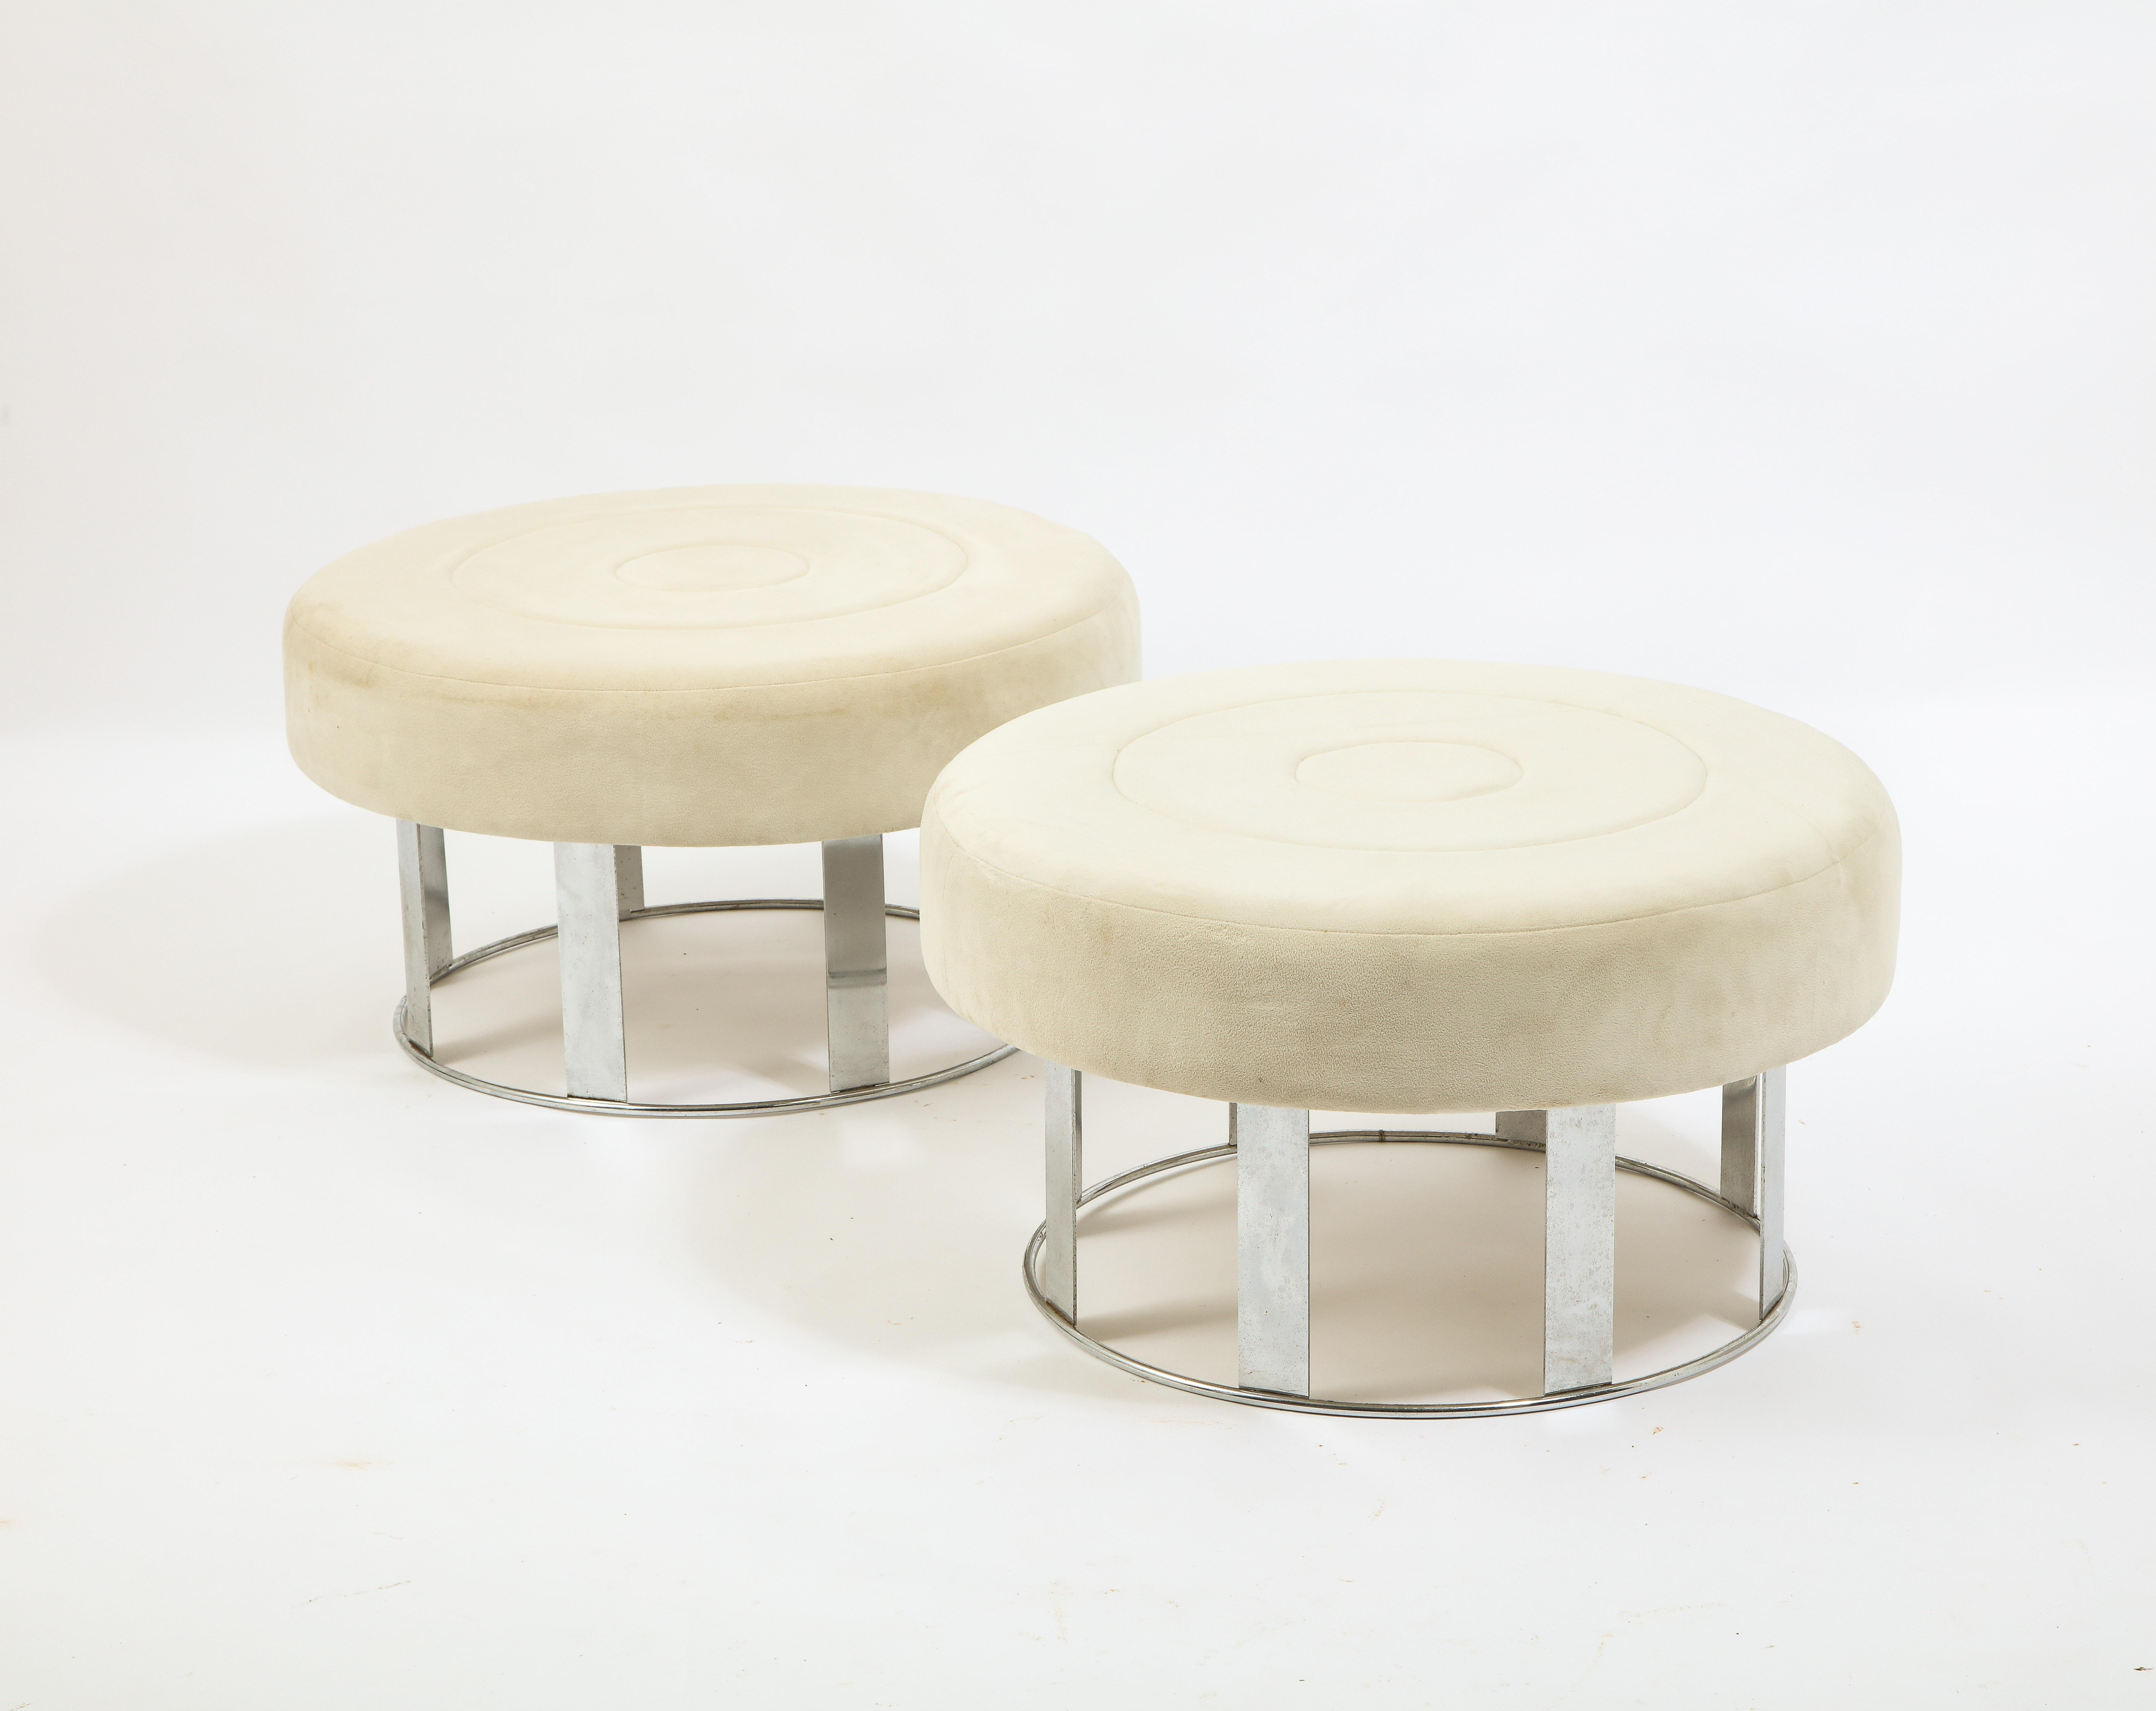 Pair of Large Round Chrome & White Velvet Ottomans, USA 1970's In Good Condition For Sale In New York, NY